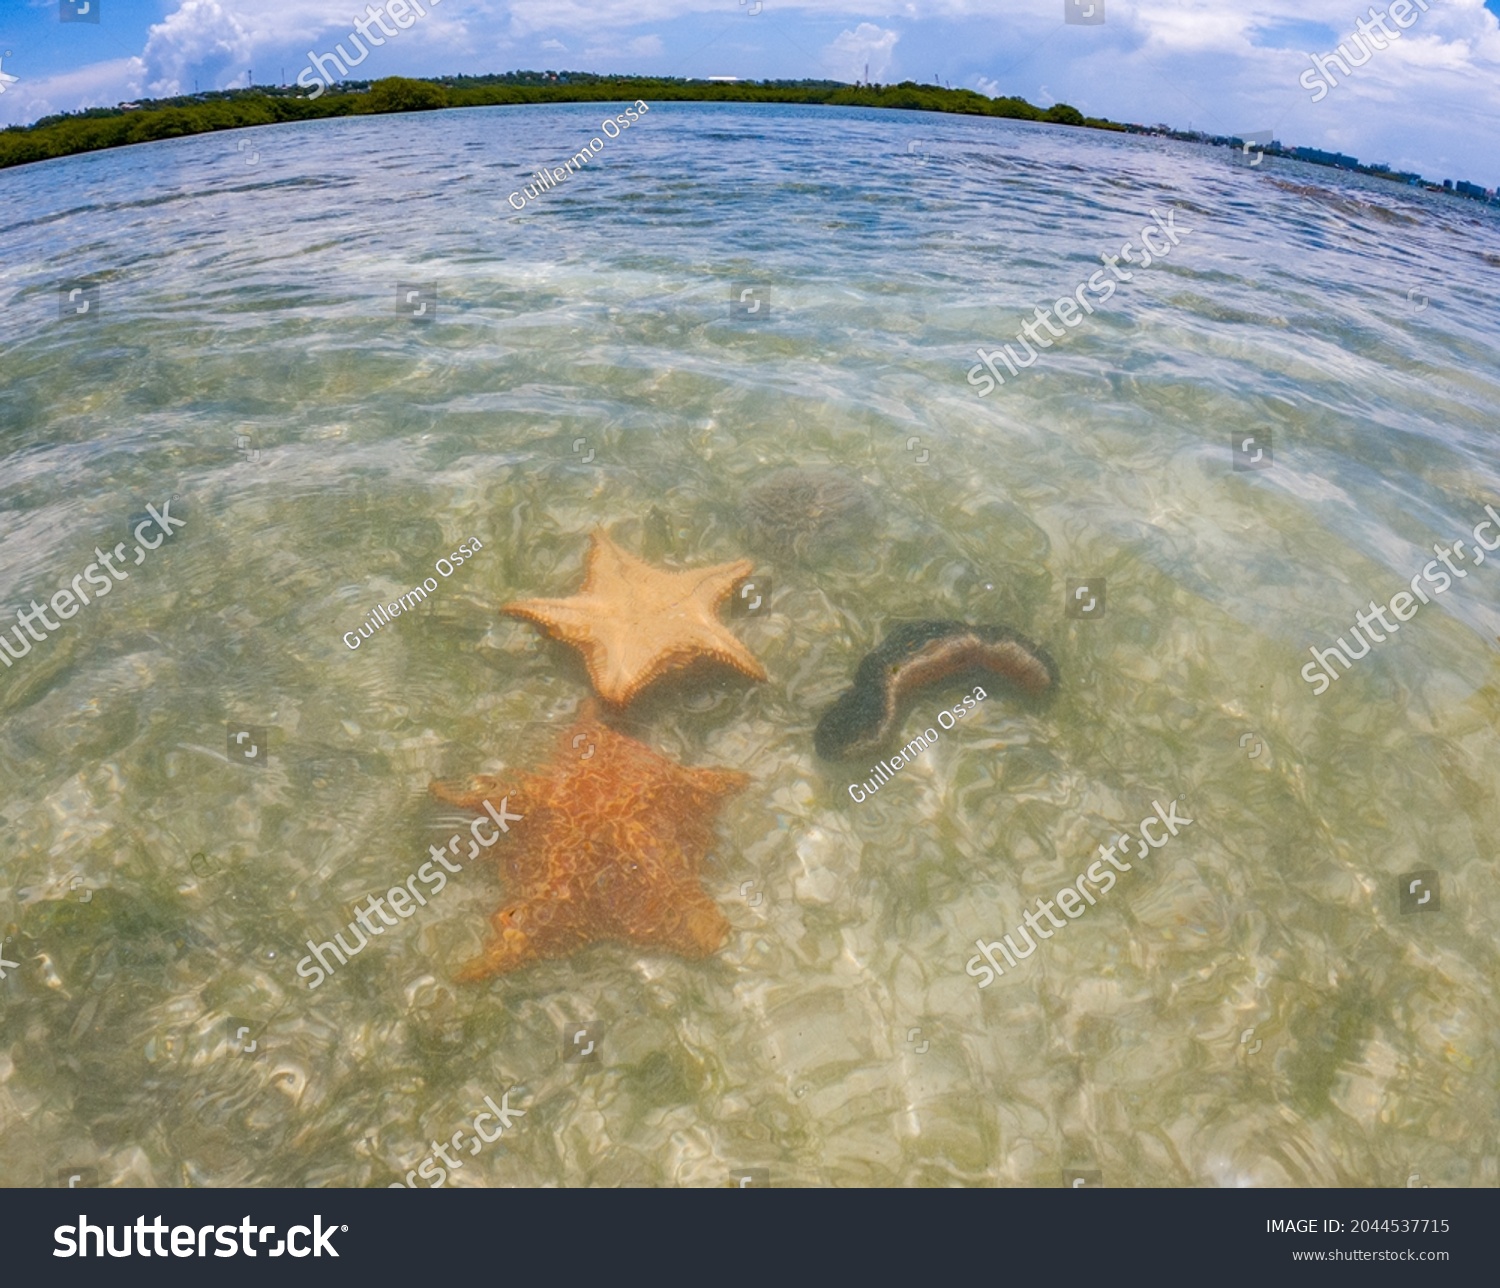 Starfish or sea stars are star-shaped echinoderms belonging to the class Asteroidea #2044537715